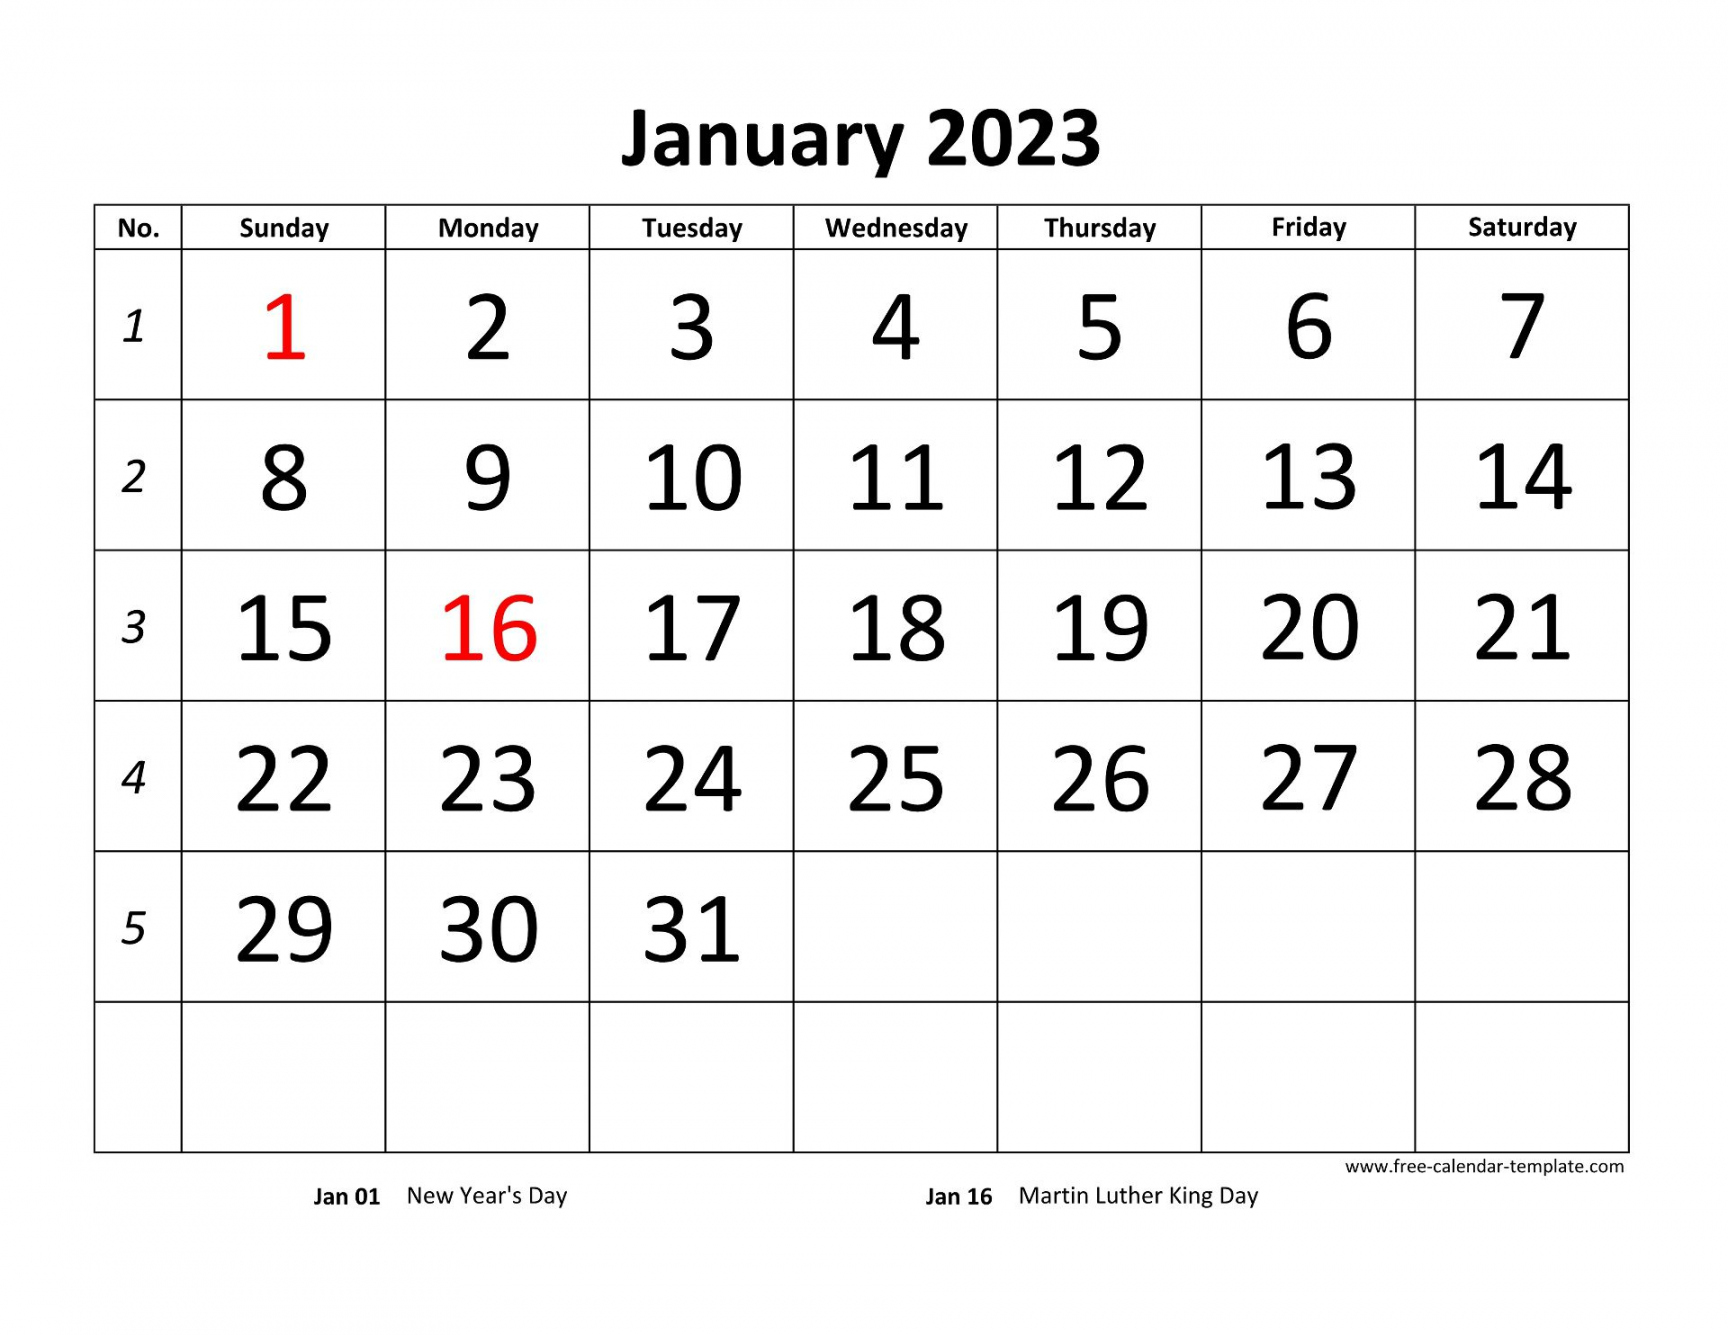 Free Printable 2023 Monthly Calendar With Holidays - Printable - Printable Monthly Calendar   Free-calendar-template